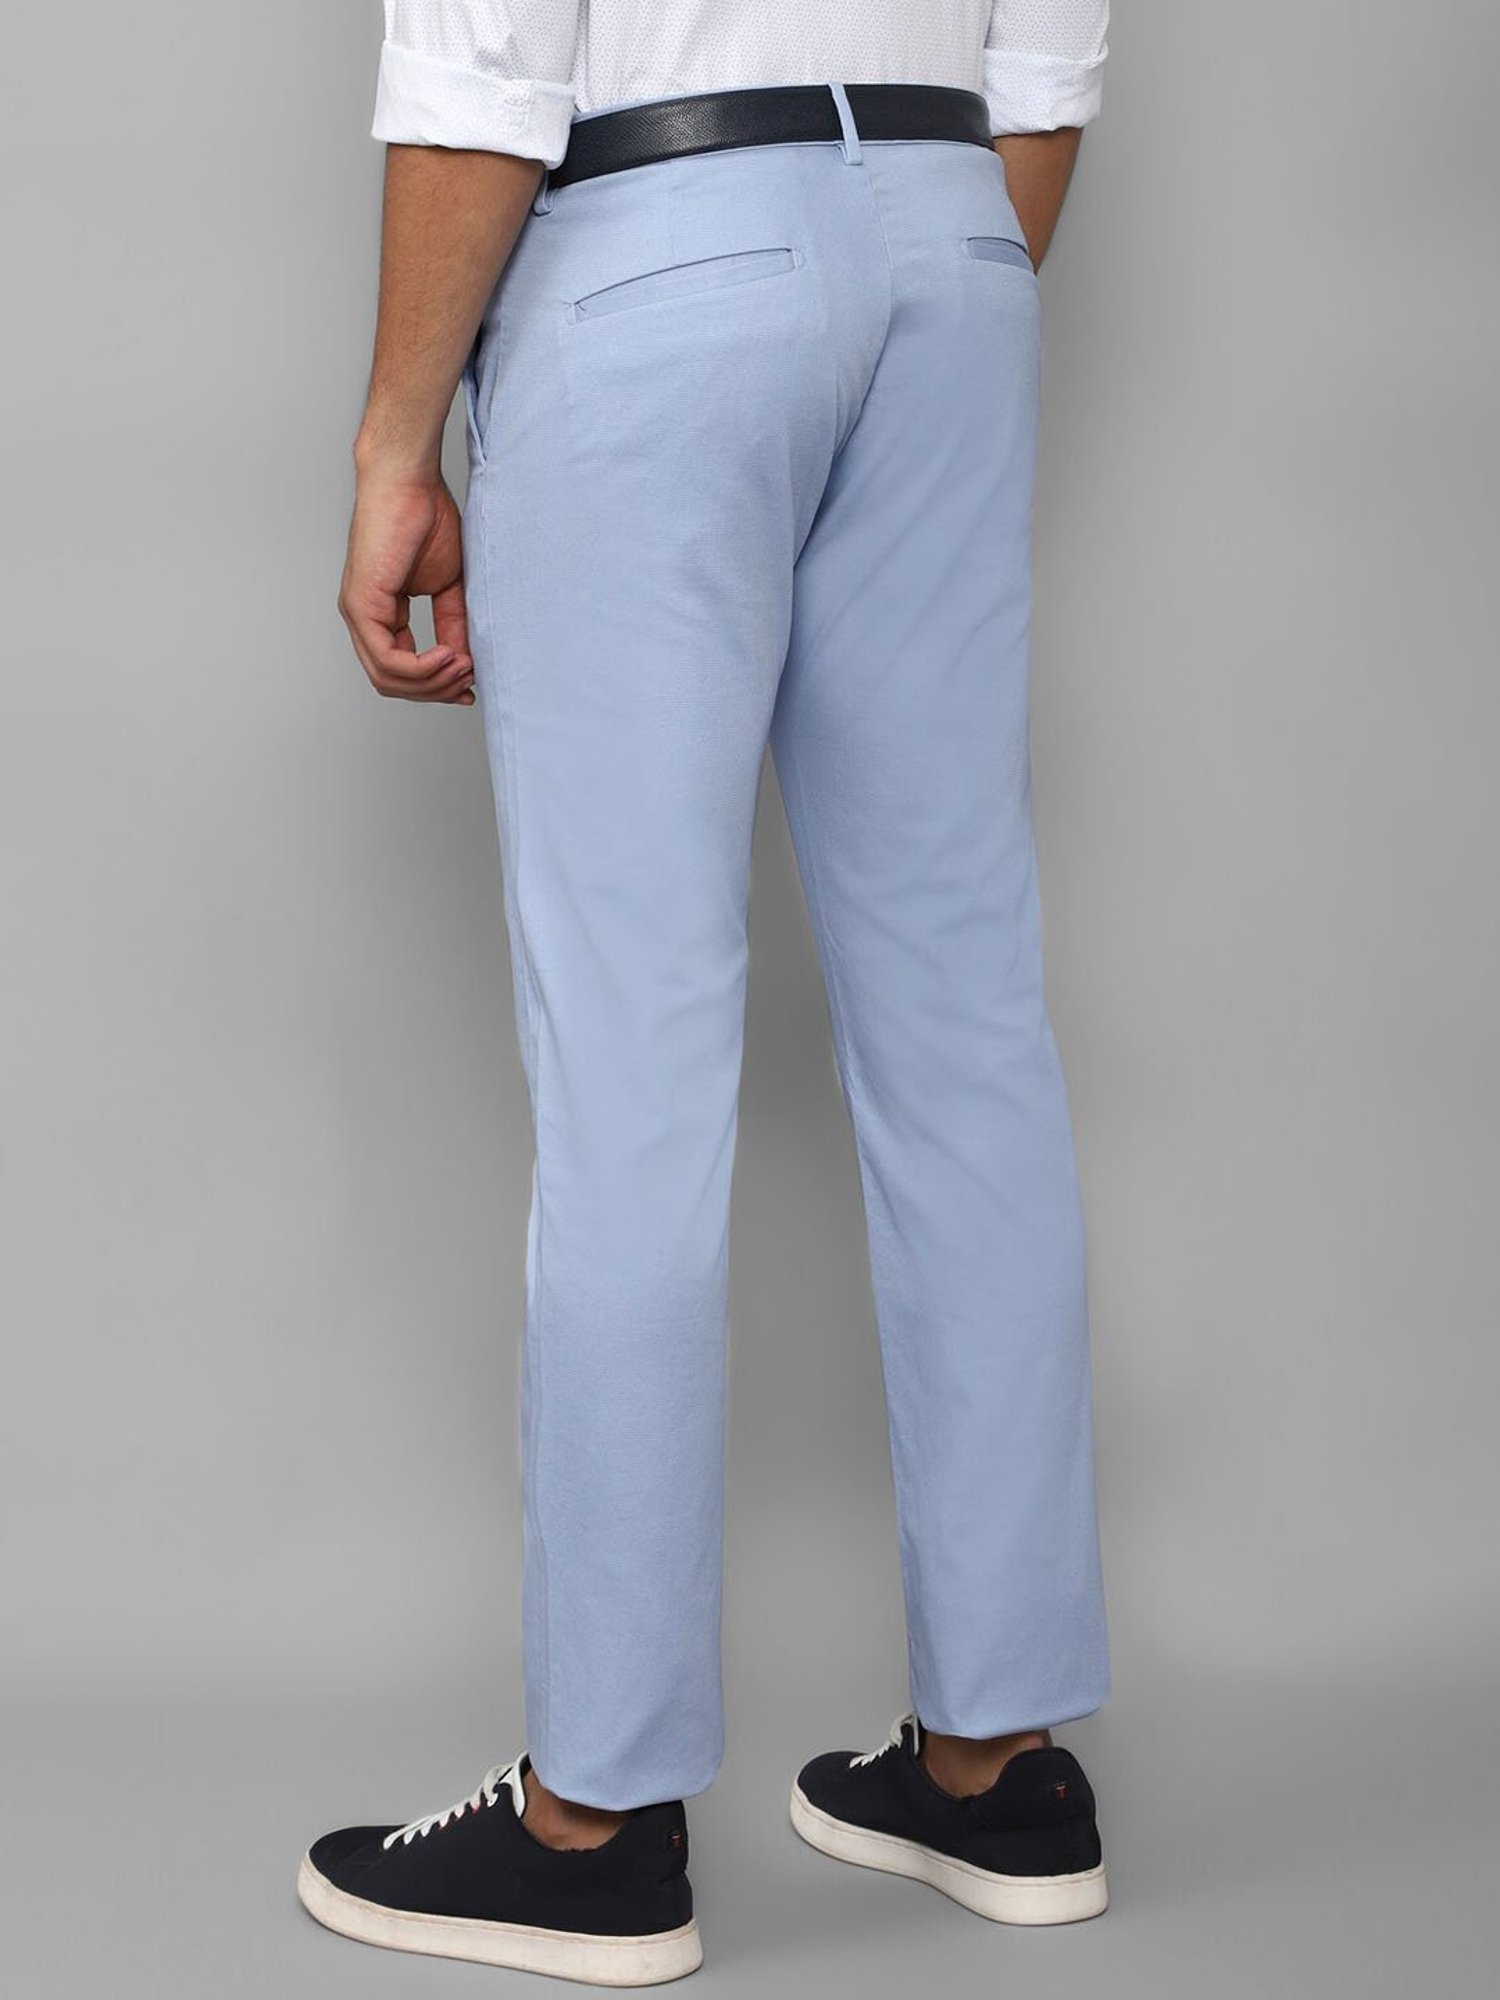 Buy Men White Slim Fit Solid Casual Trousers Online - 749871 | Allen Solly